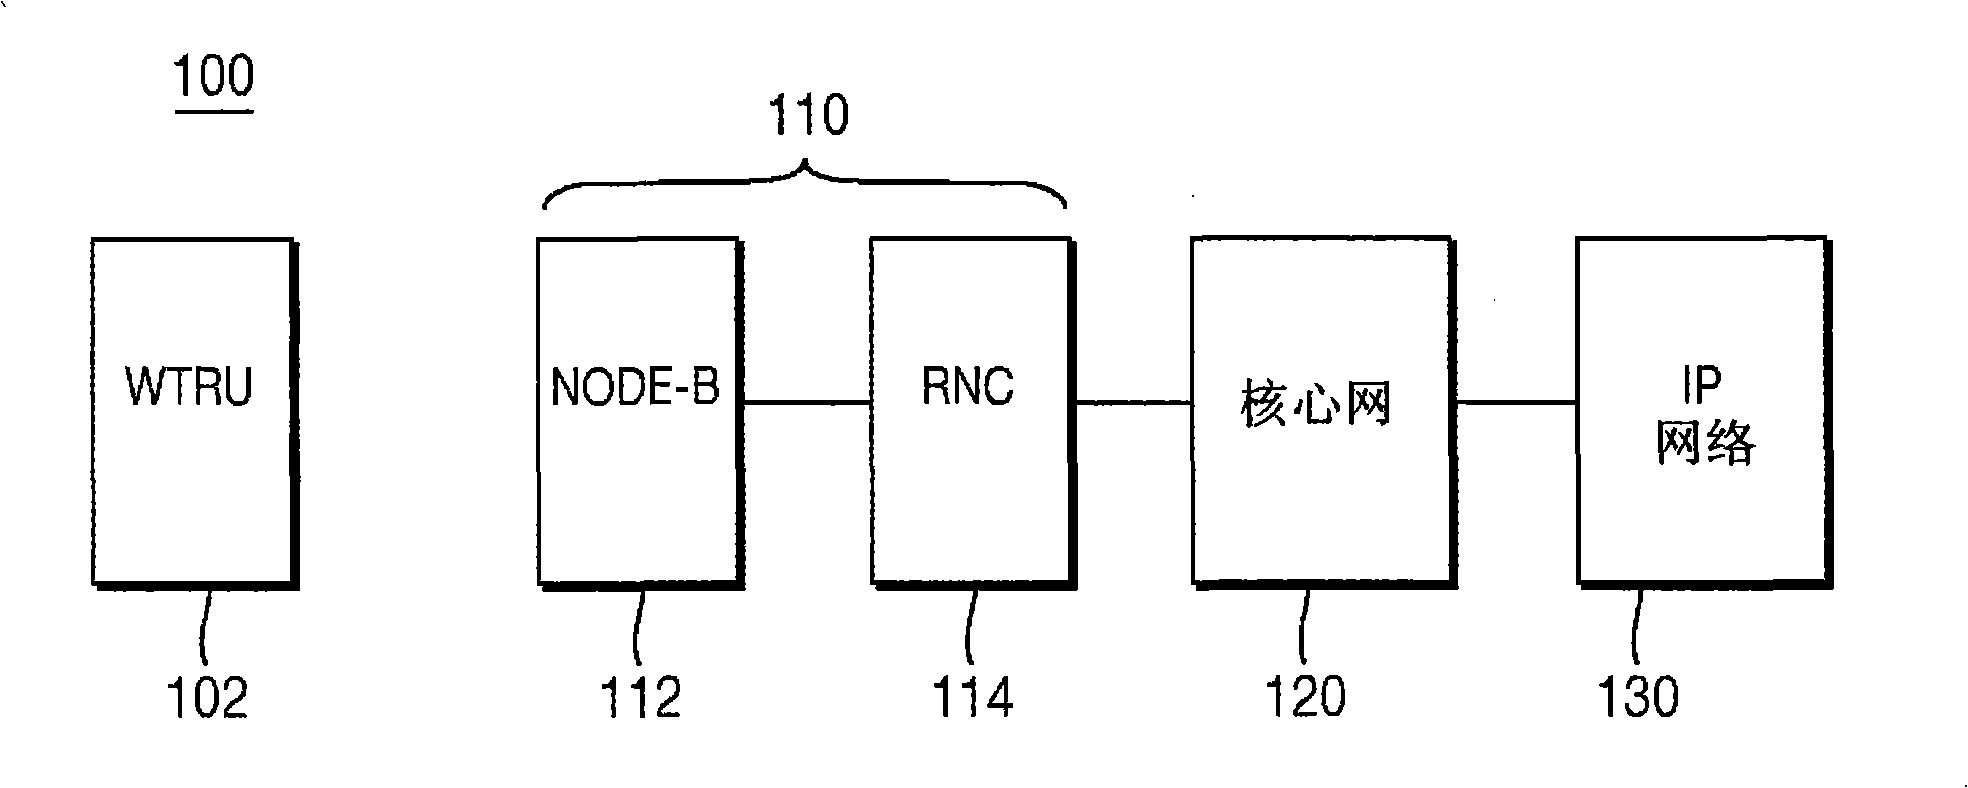 Method and apparatus for supporting voice over ip services over a cellular wireless communication network